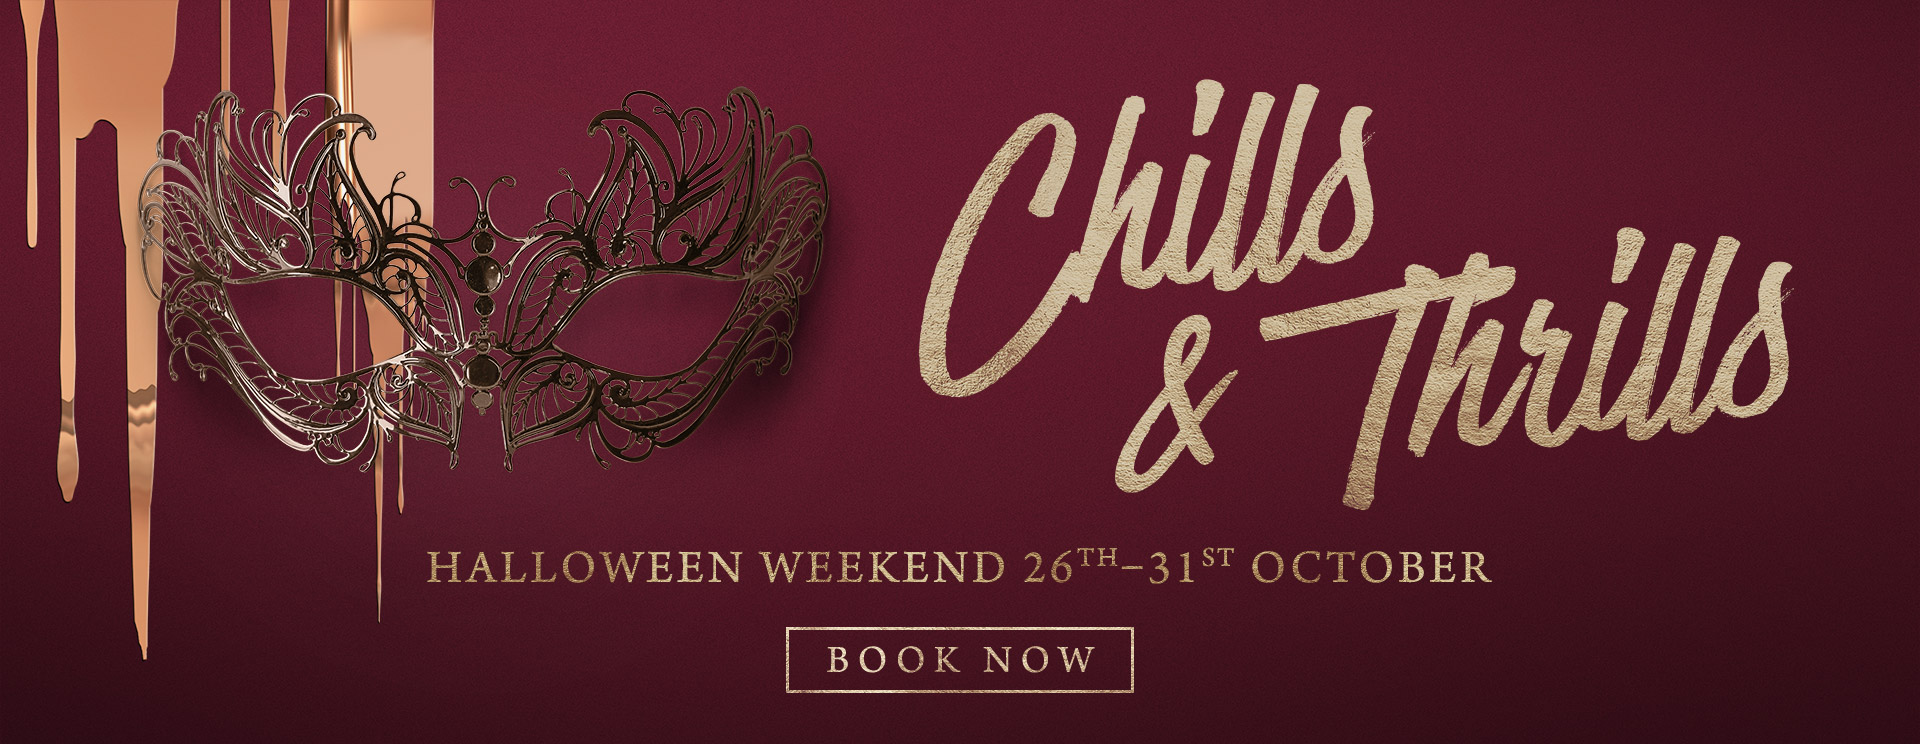 Chills & Thrills this Halloween at The St George & Dragon